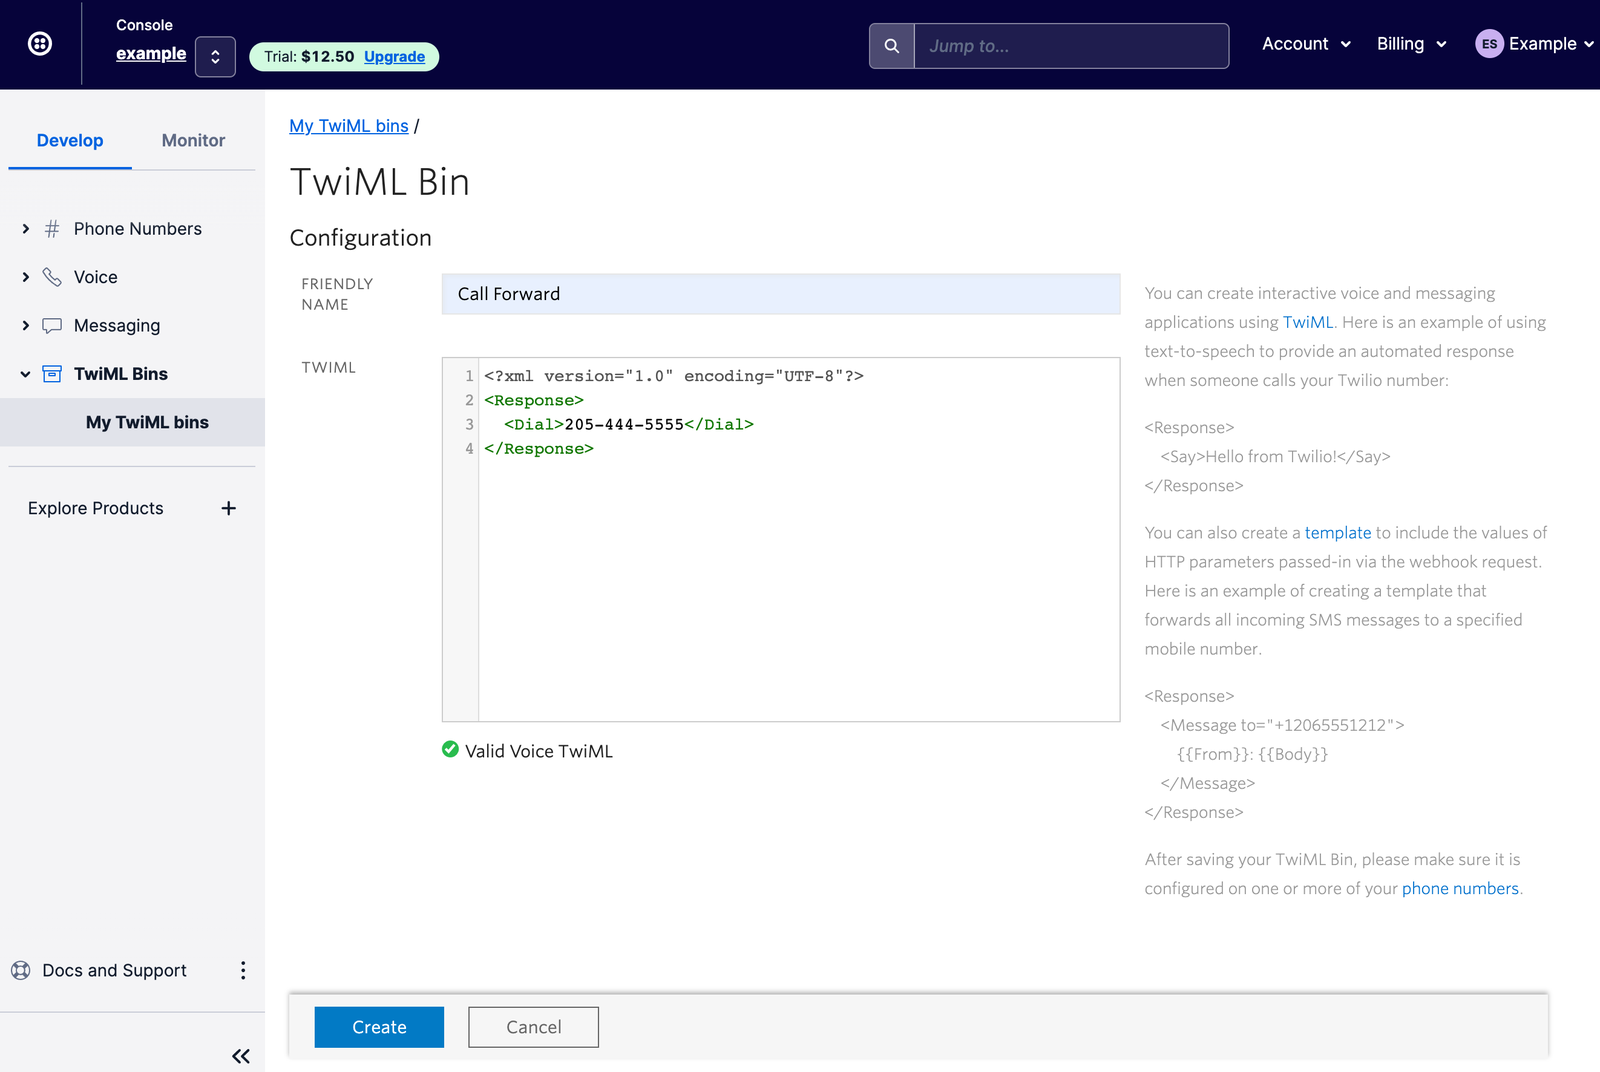 Example of creating a TwiML Bin and configuring its response and content.